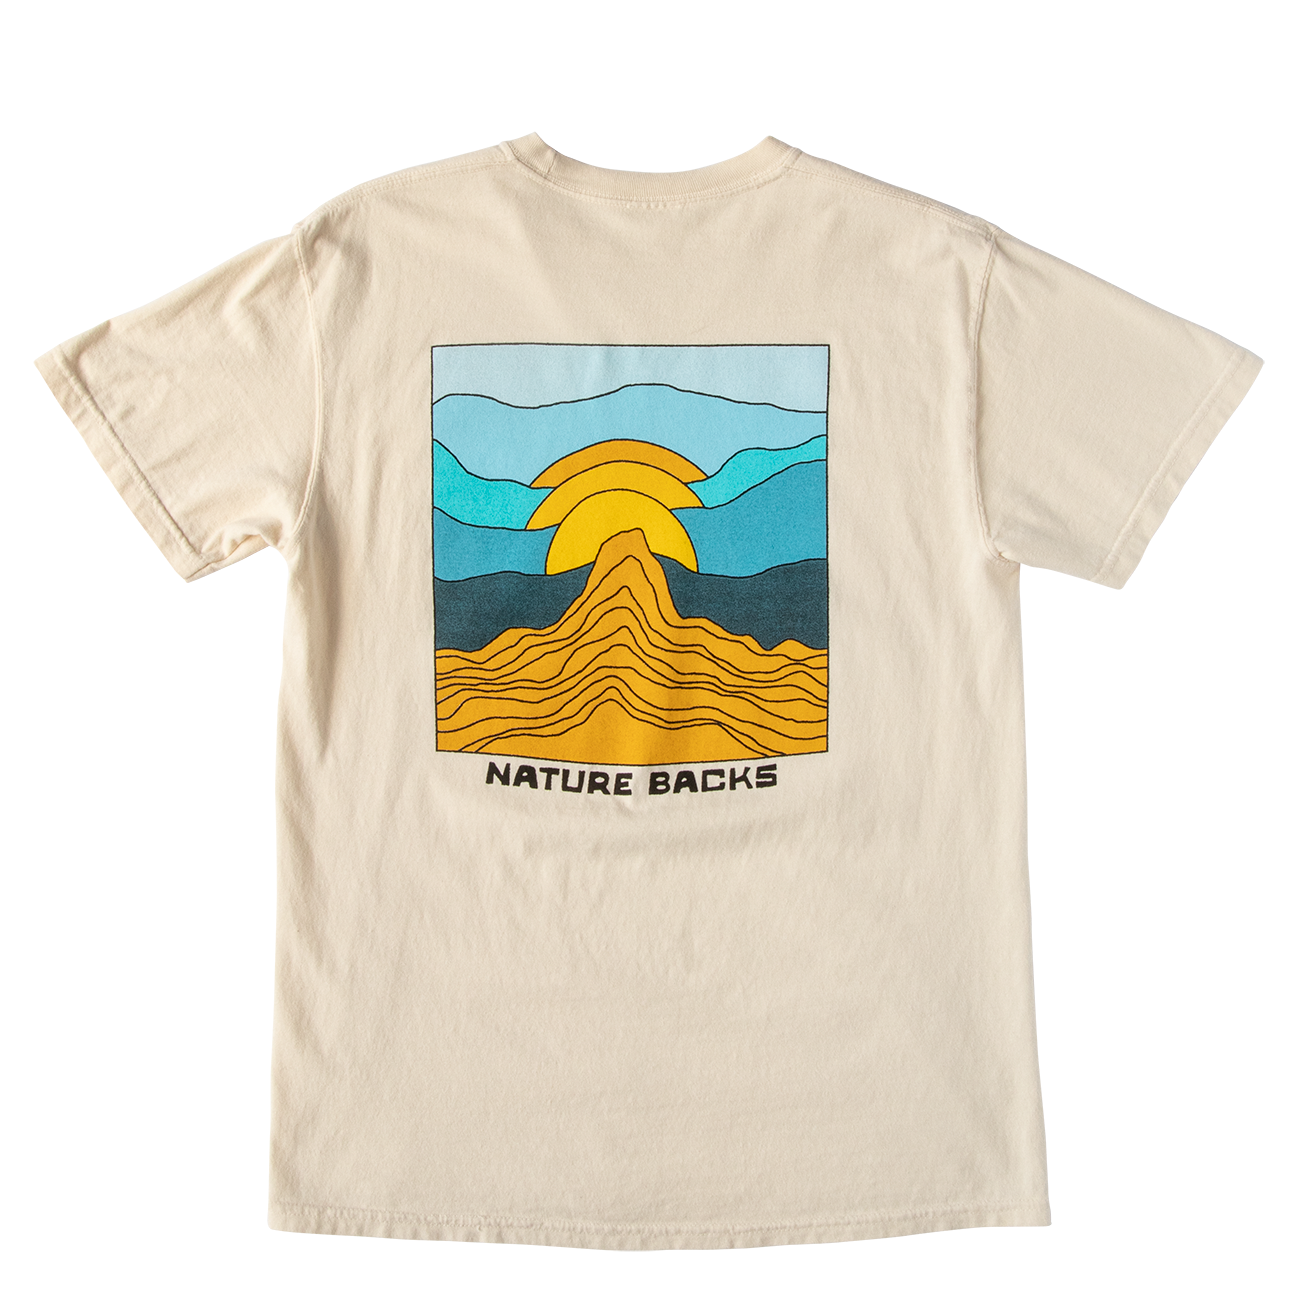 Nature Backs Limited Edition Short Sleeve 100% Organic Cotton T-Shirt | Limited Gradient Ivory Short Sleeve made with Eco-Friendly Fibers Sustainably made in the USA 